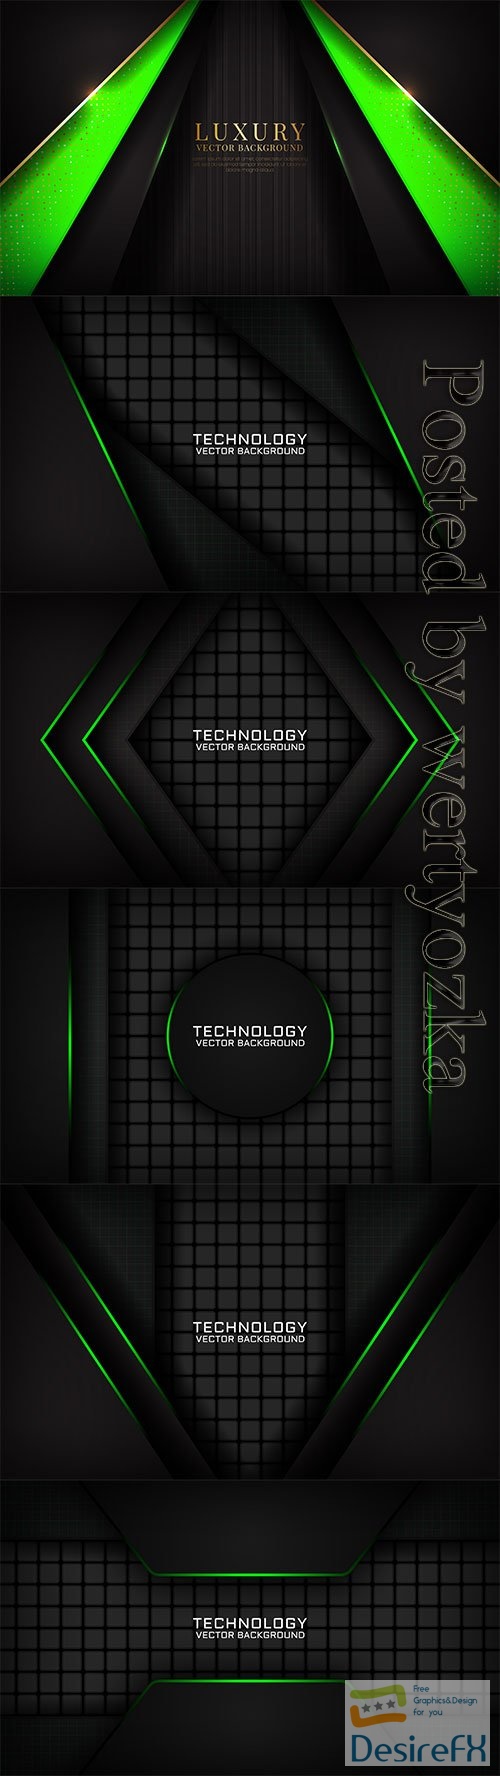 Abstract 3d black and green design technology background with light effect